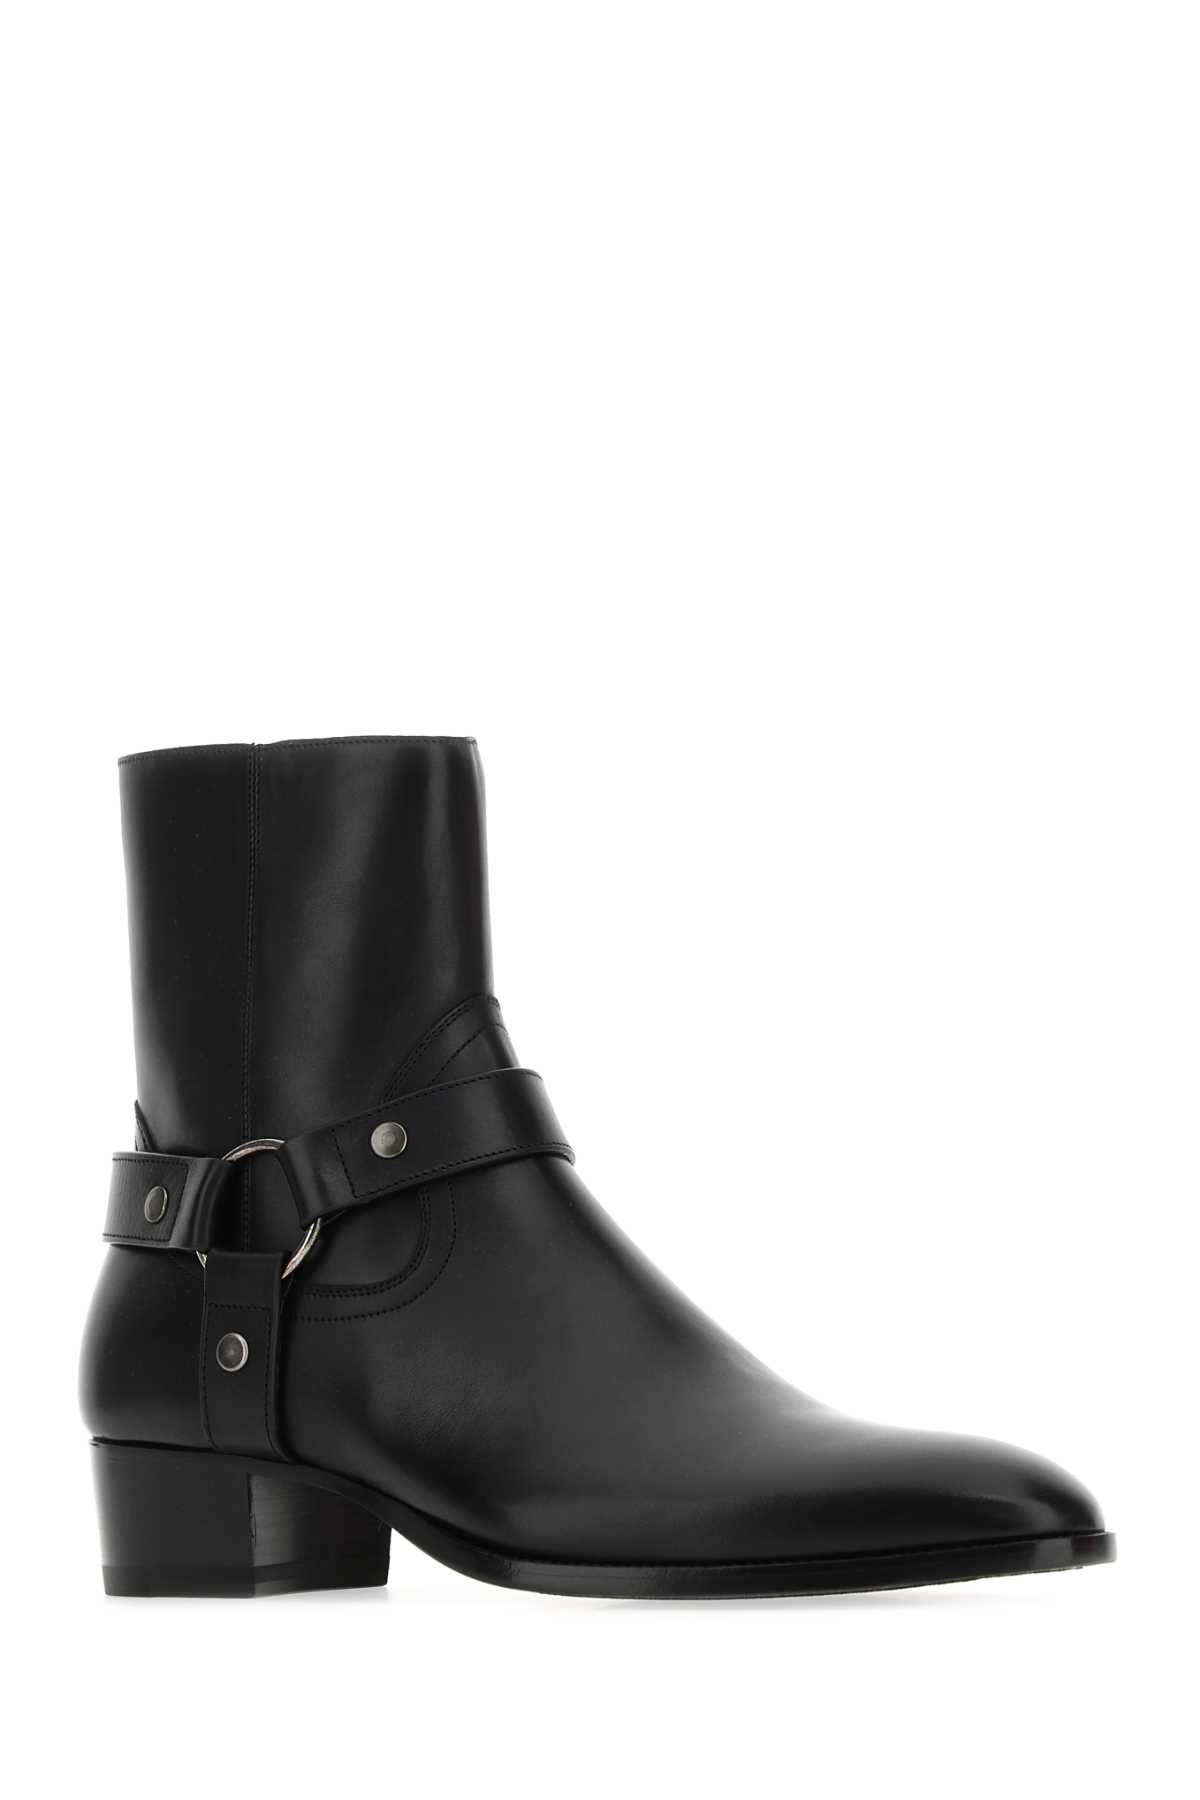 Saint Laurent Black Leather Ankle Boots In 1000